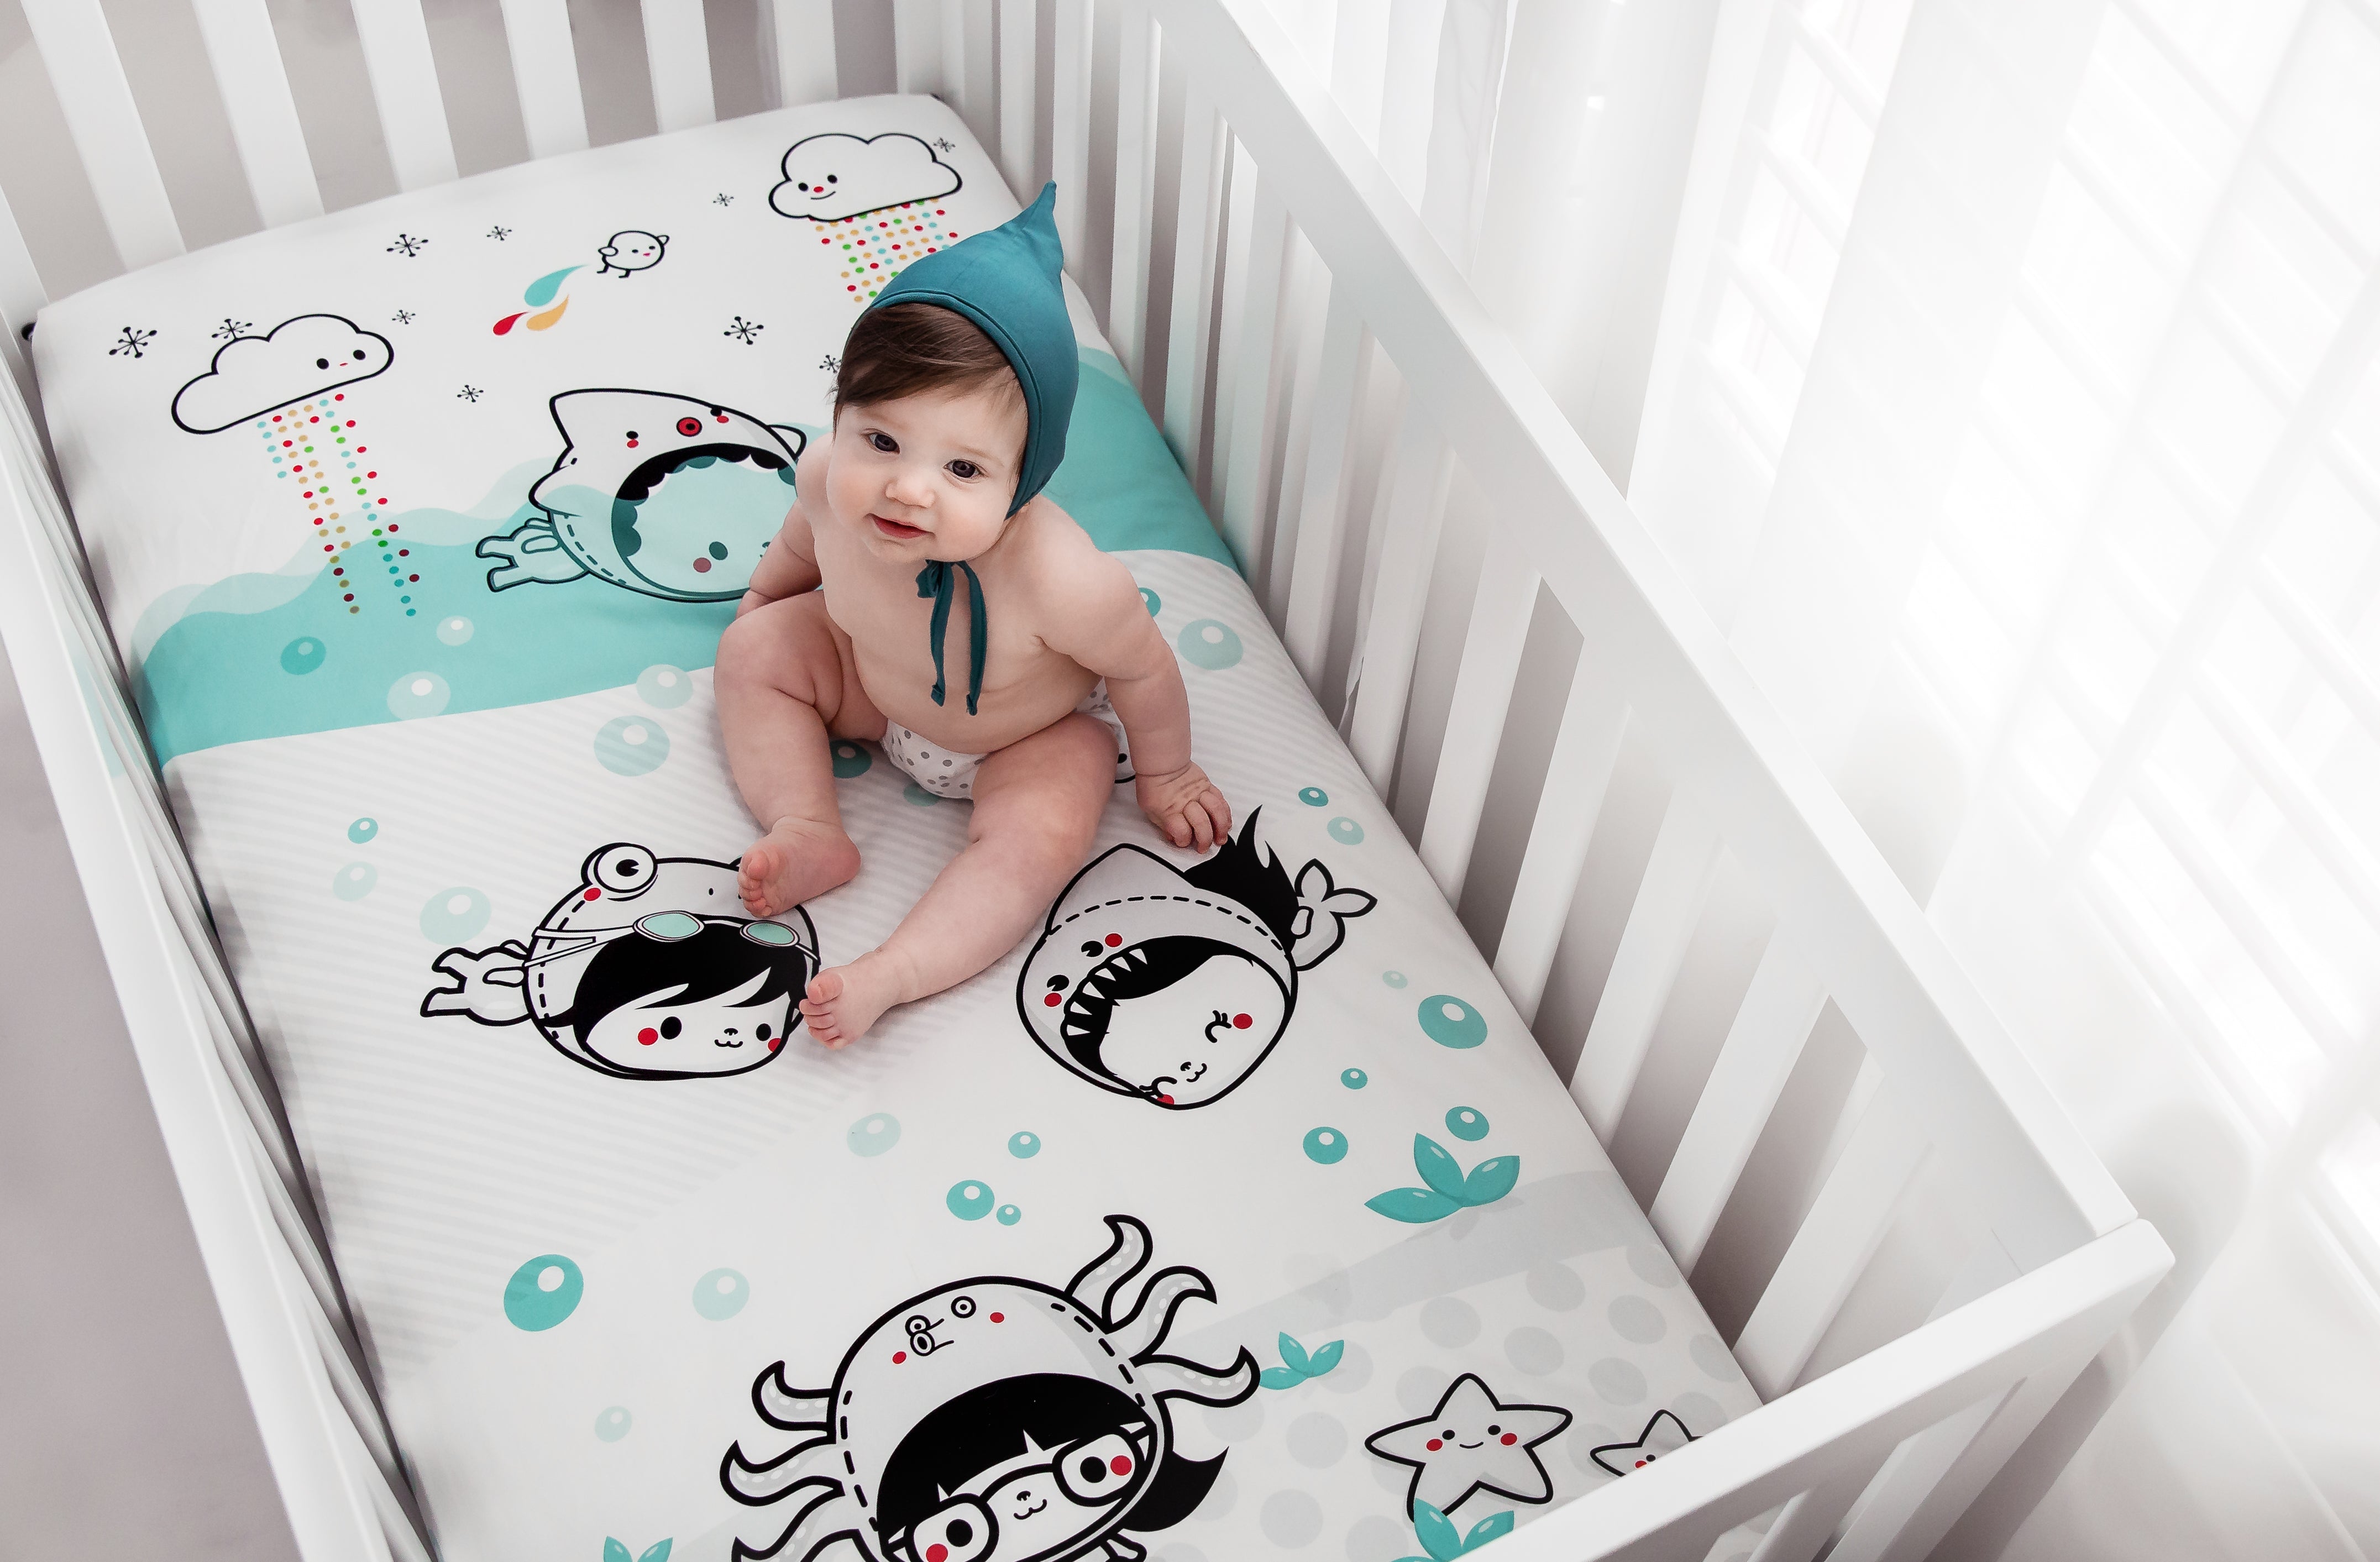 Fitted baby crib sheet by Rookie Humans, Dive In. Illustrated by Elisa Sassi. Designed for the modern nursery, packaged to make a unique baby shower gift. 